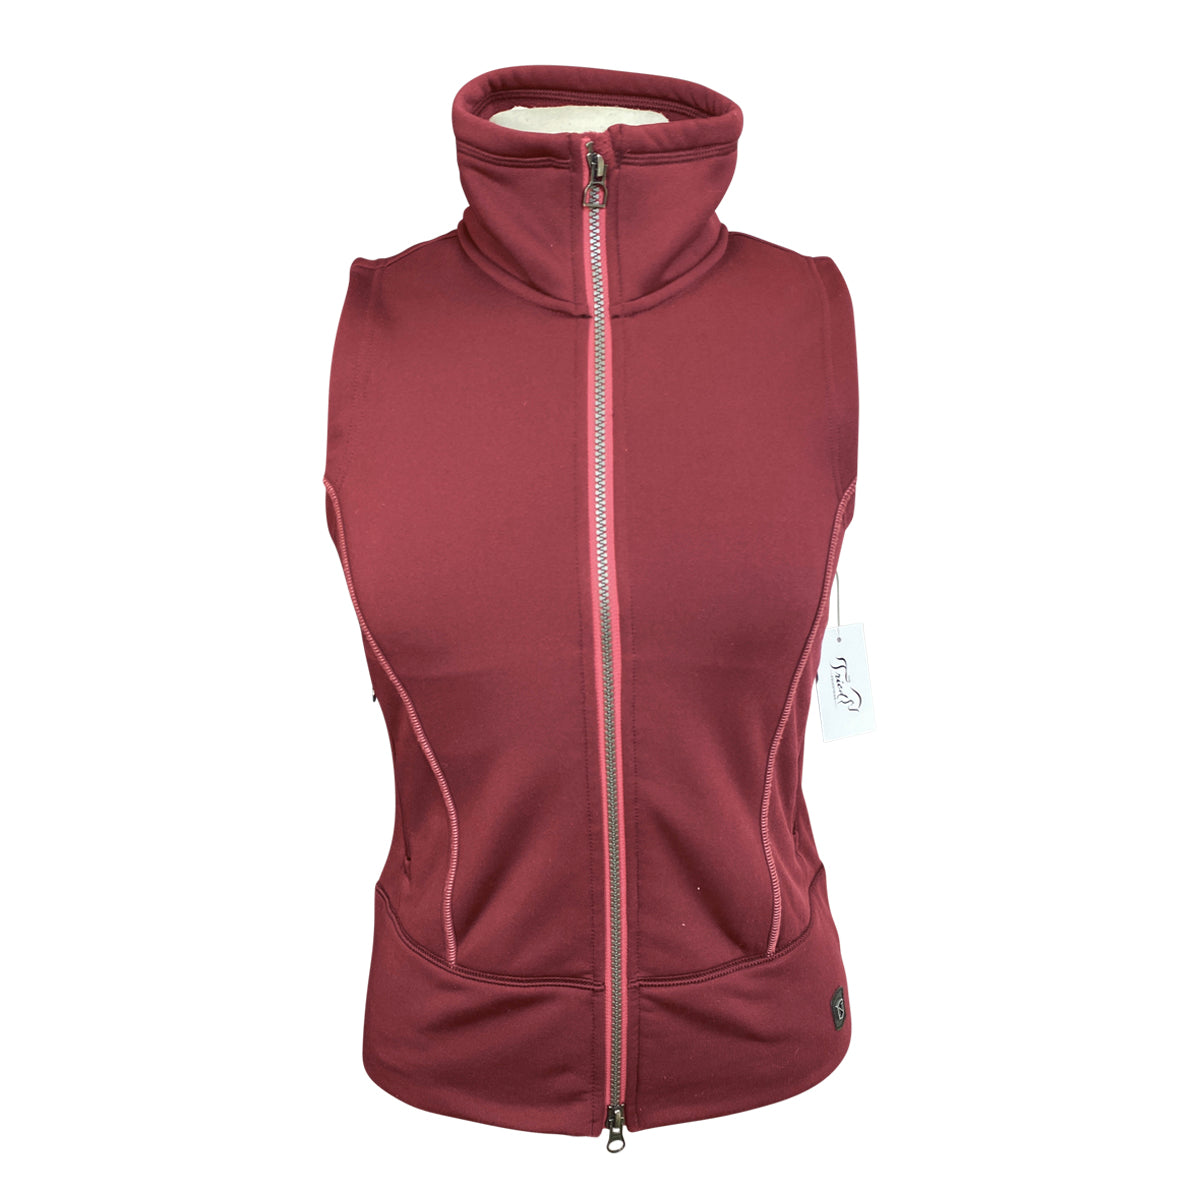 Noble Outfitters Softshell Vest in Burgundy